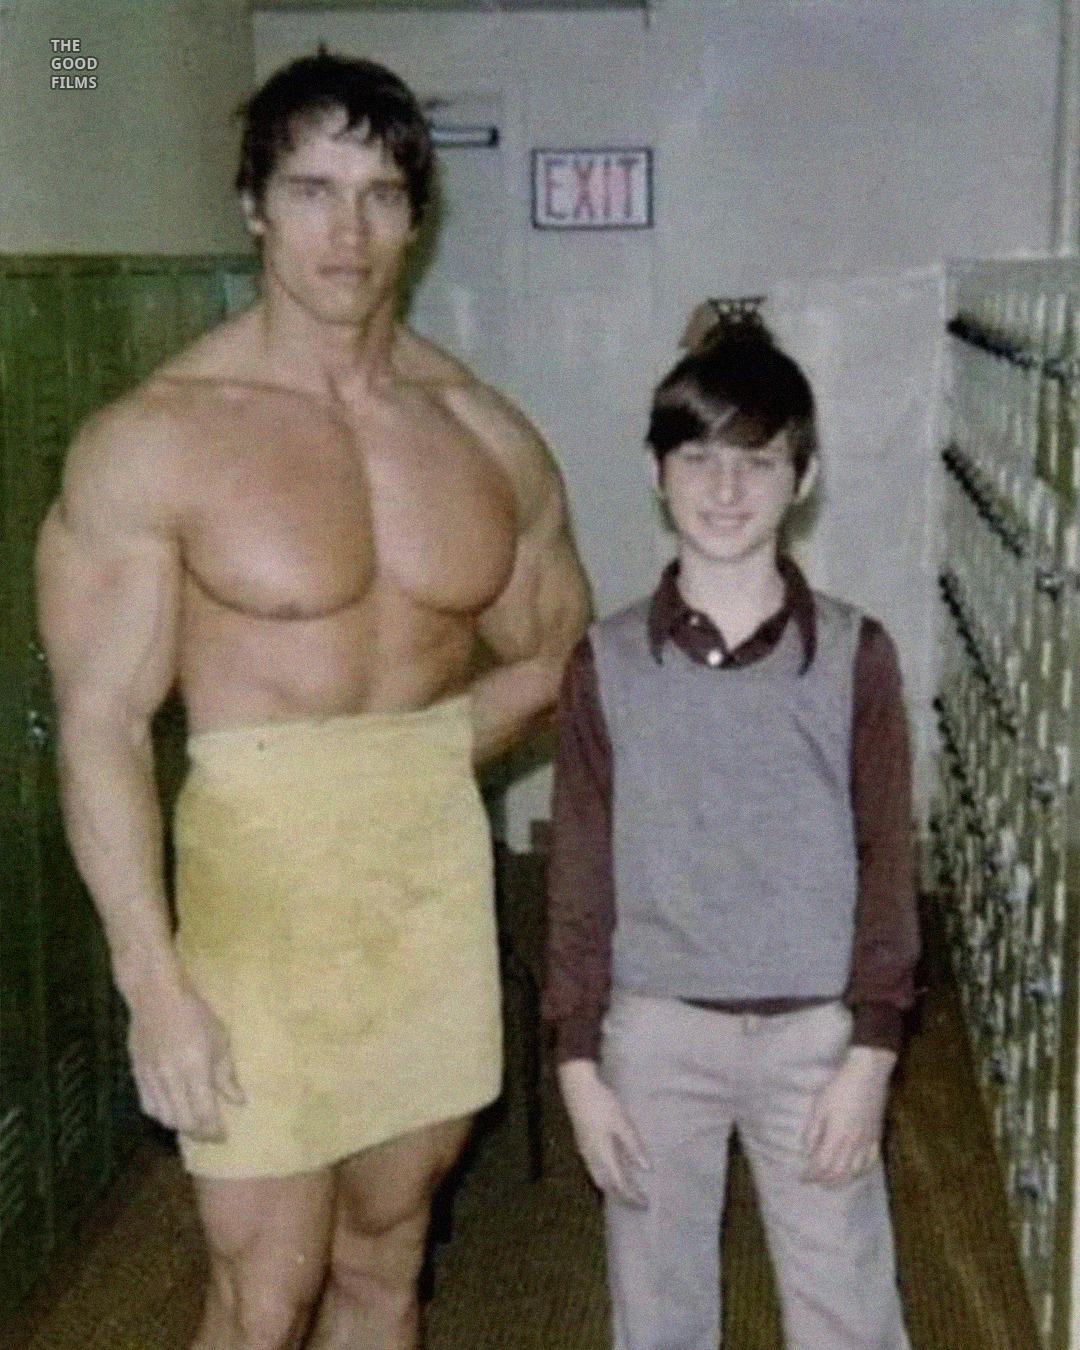 Obrázek Arnold and his classmate both 18 years old